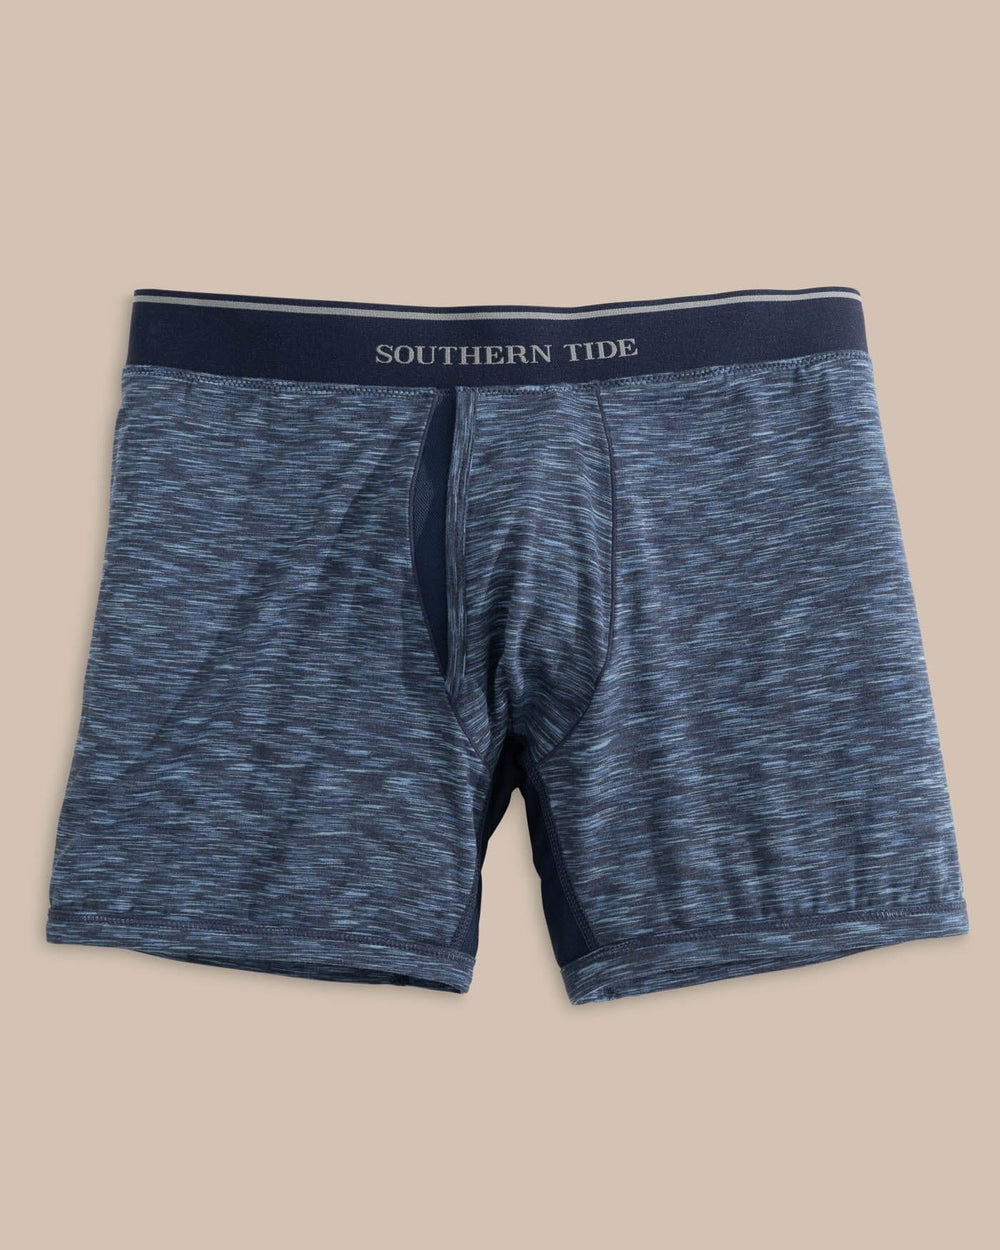 The front of the Men's Baxter Boxer Brief by Southern Tide - True Navy